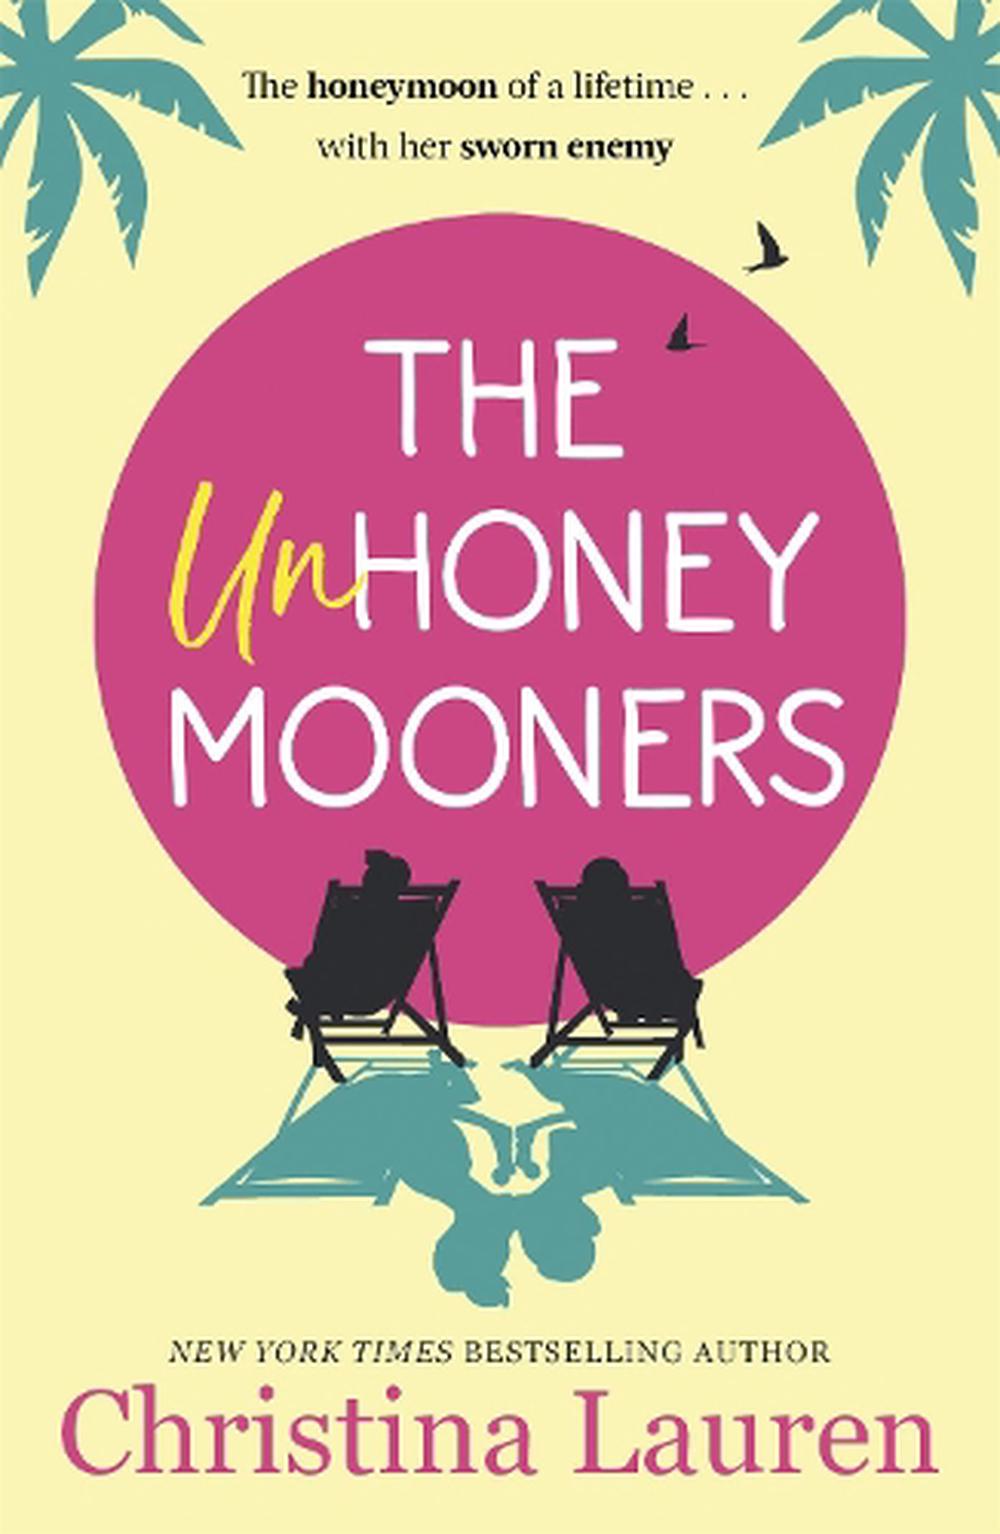 online　Buy　Lauren,　9780349417592　Paperback,　The　Christina　Nile　Unhoneymooners　The　by　at